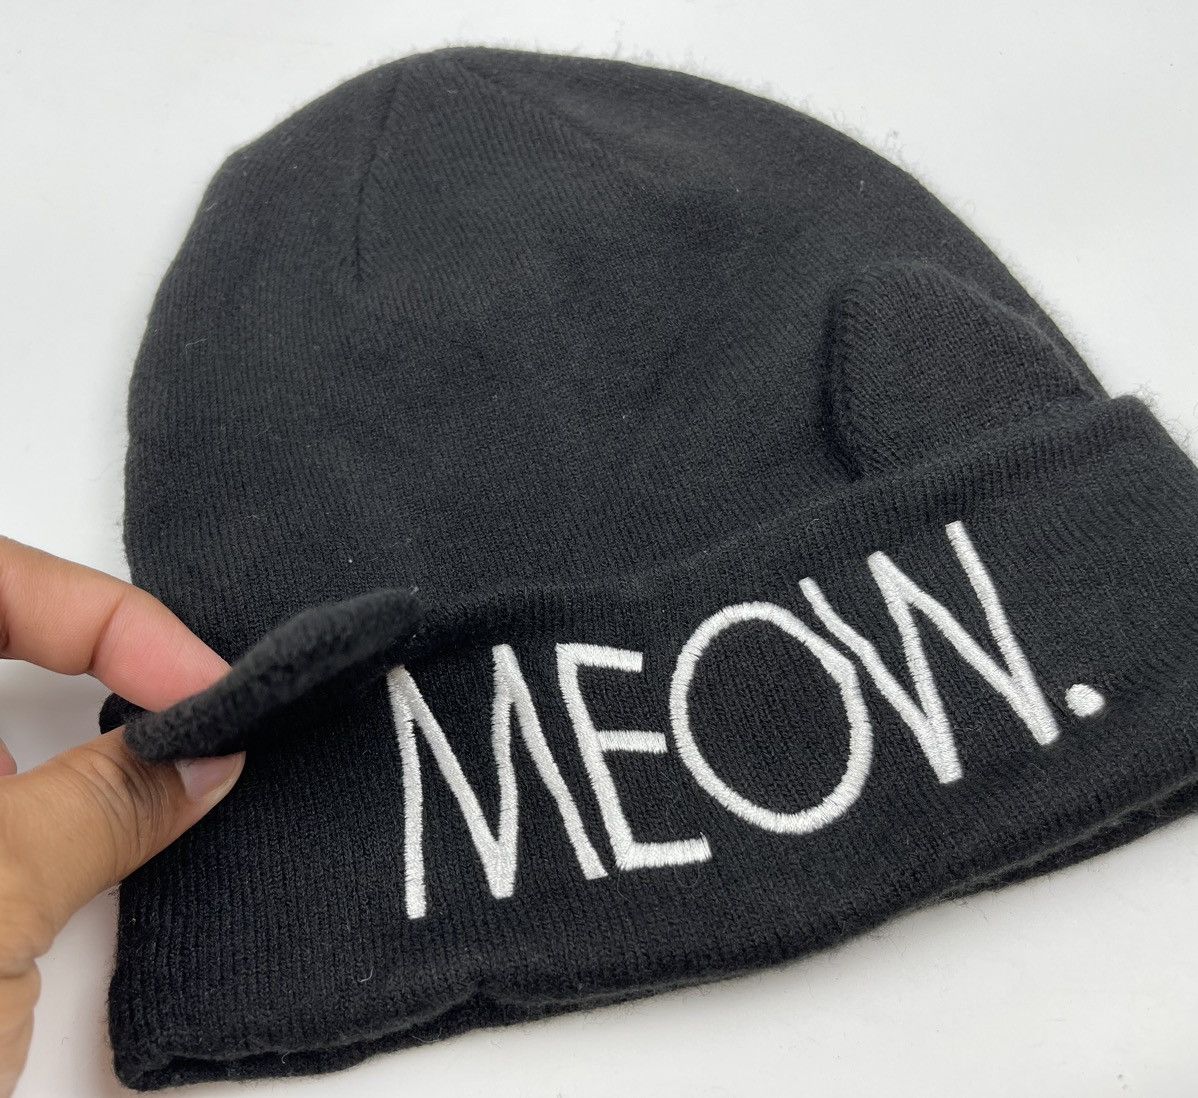 H&M - meow beanie hat with ear - 5